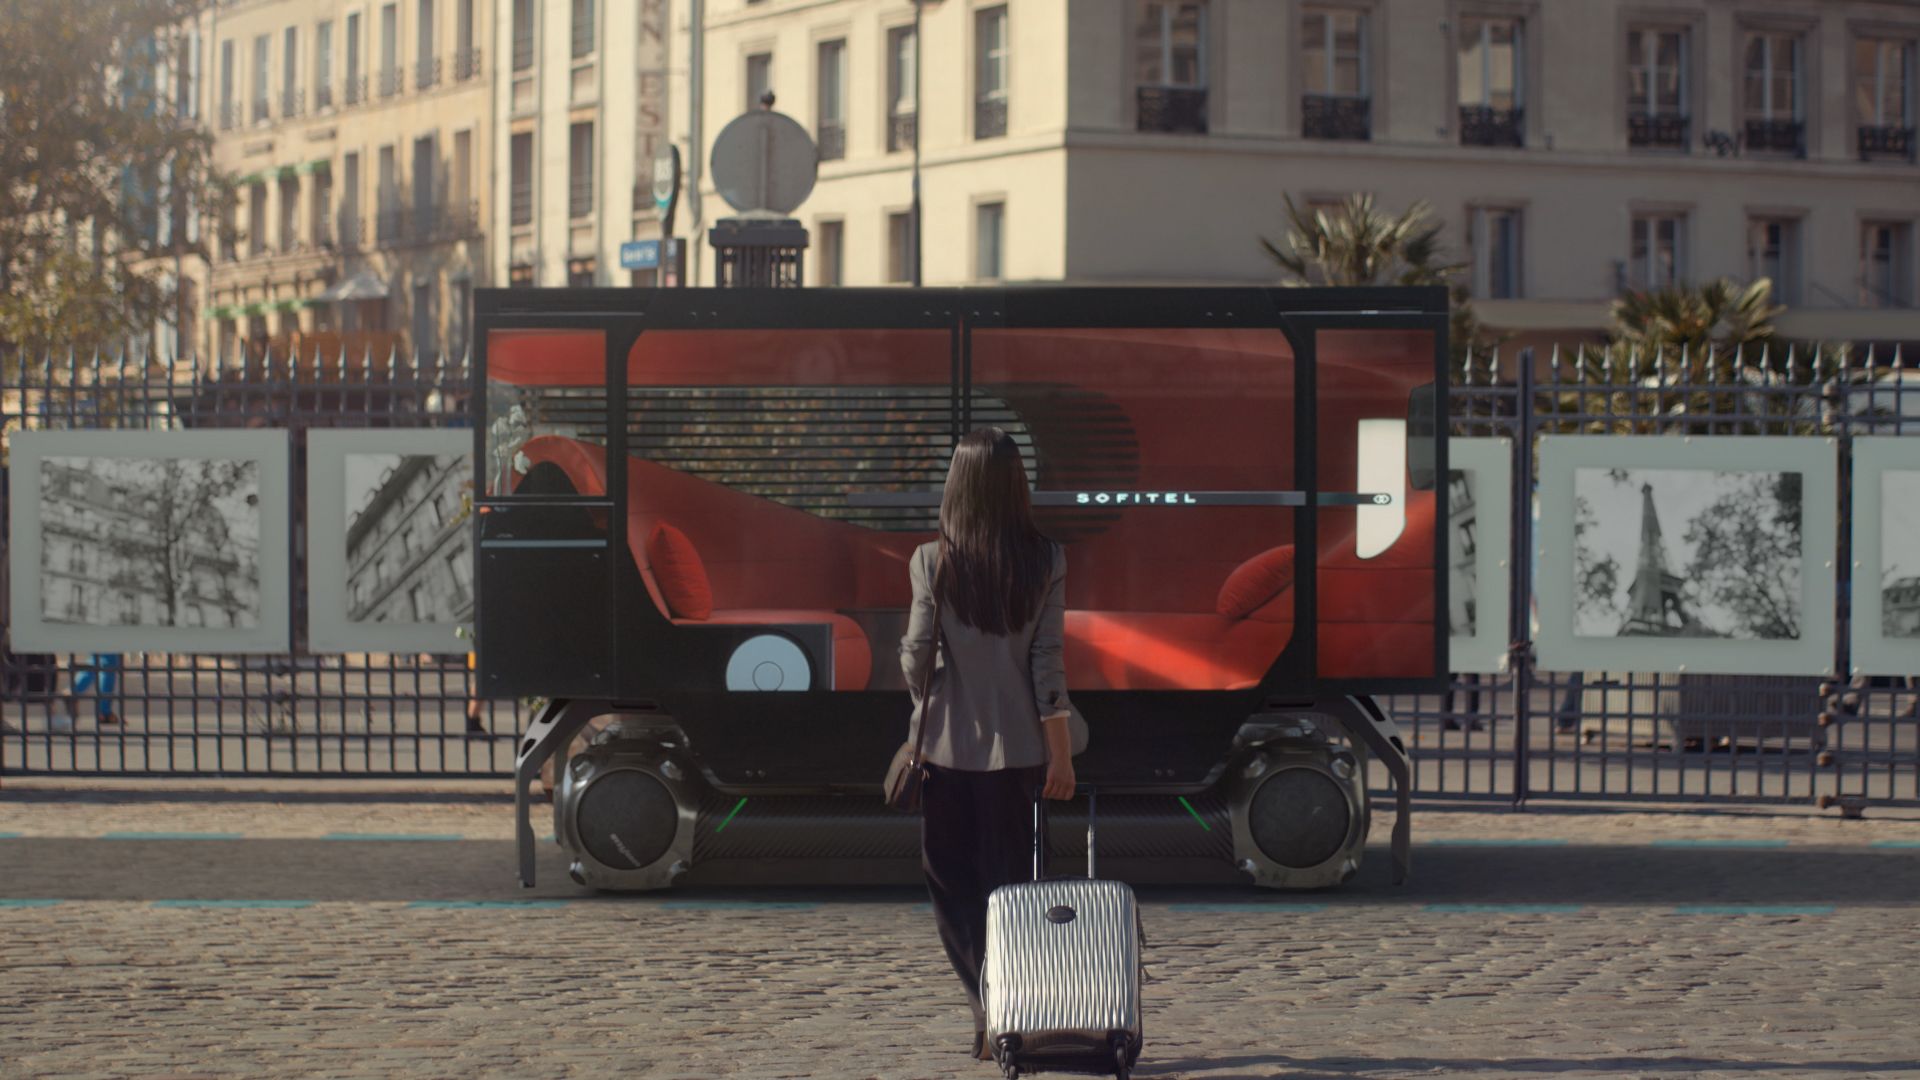 A woman with luggage approaching the Citroen En Voyage concept for an autonomous hotel lounge on wheels.